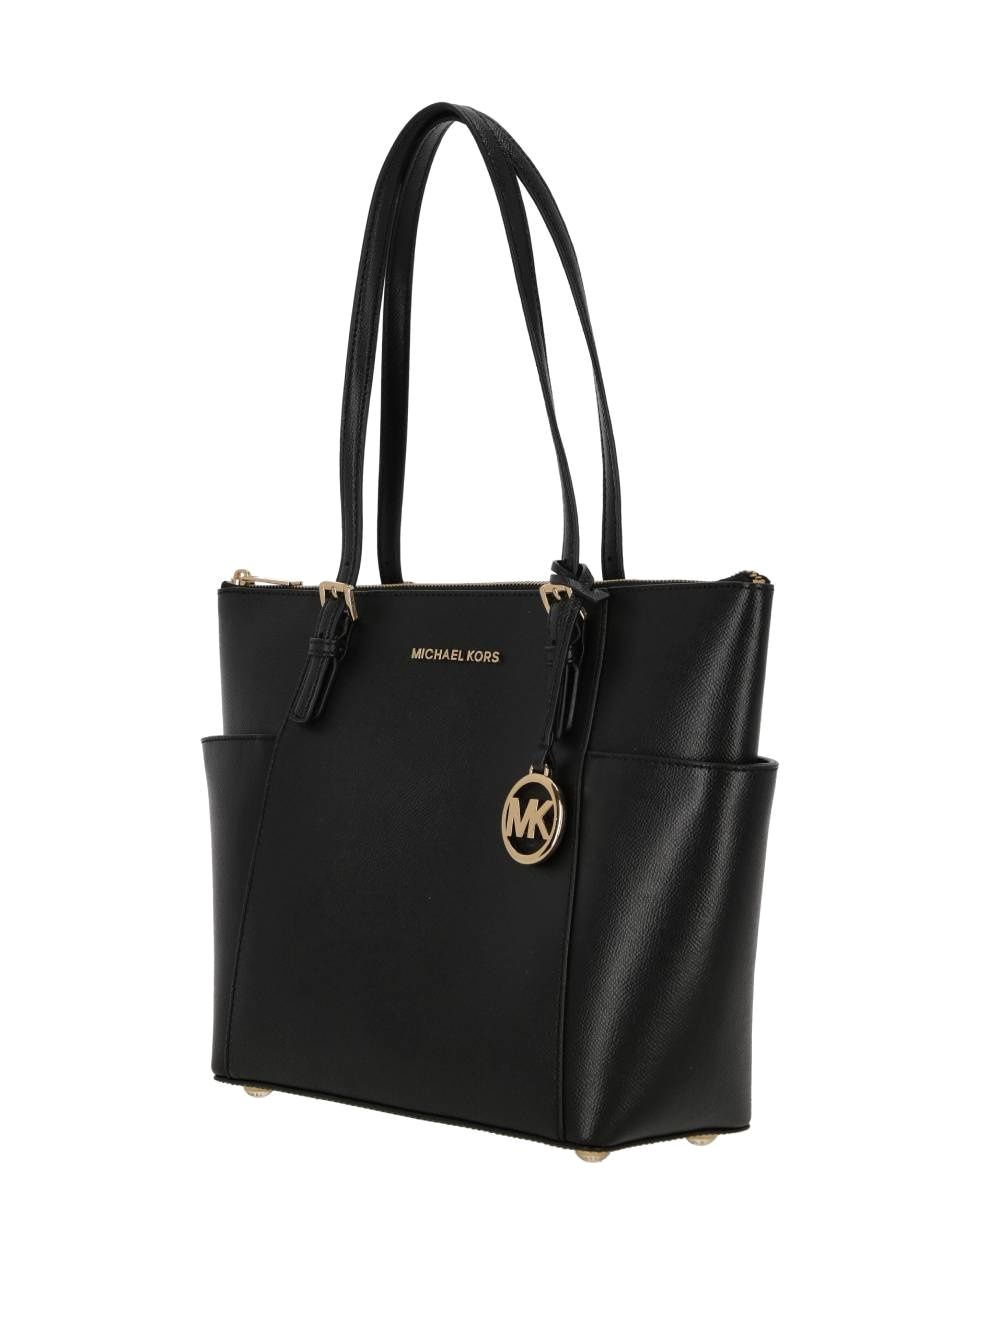 Marilyn leather tote bag.